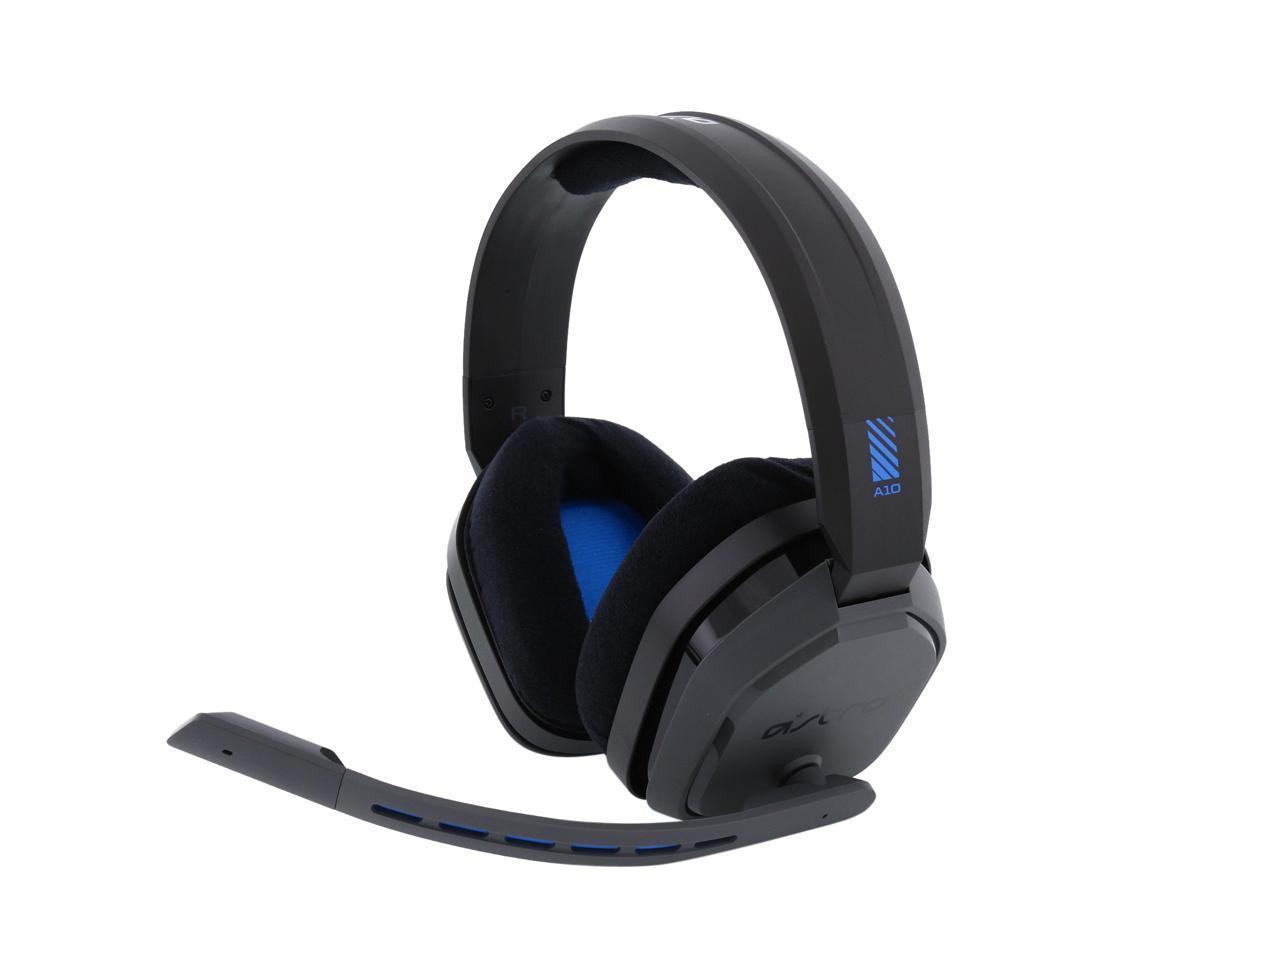 astro a10 headset on pc